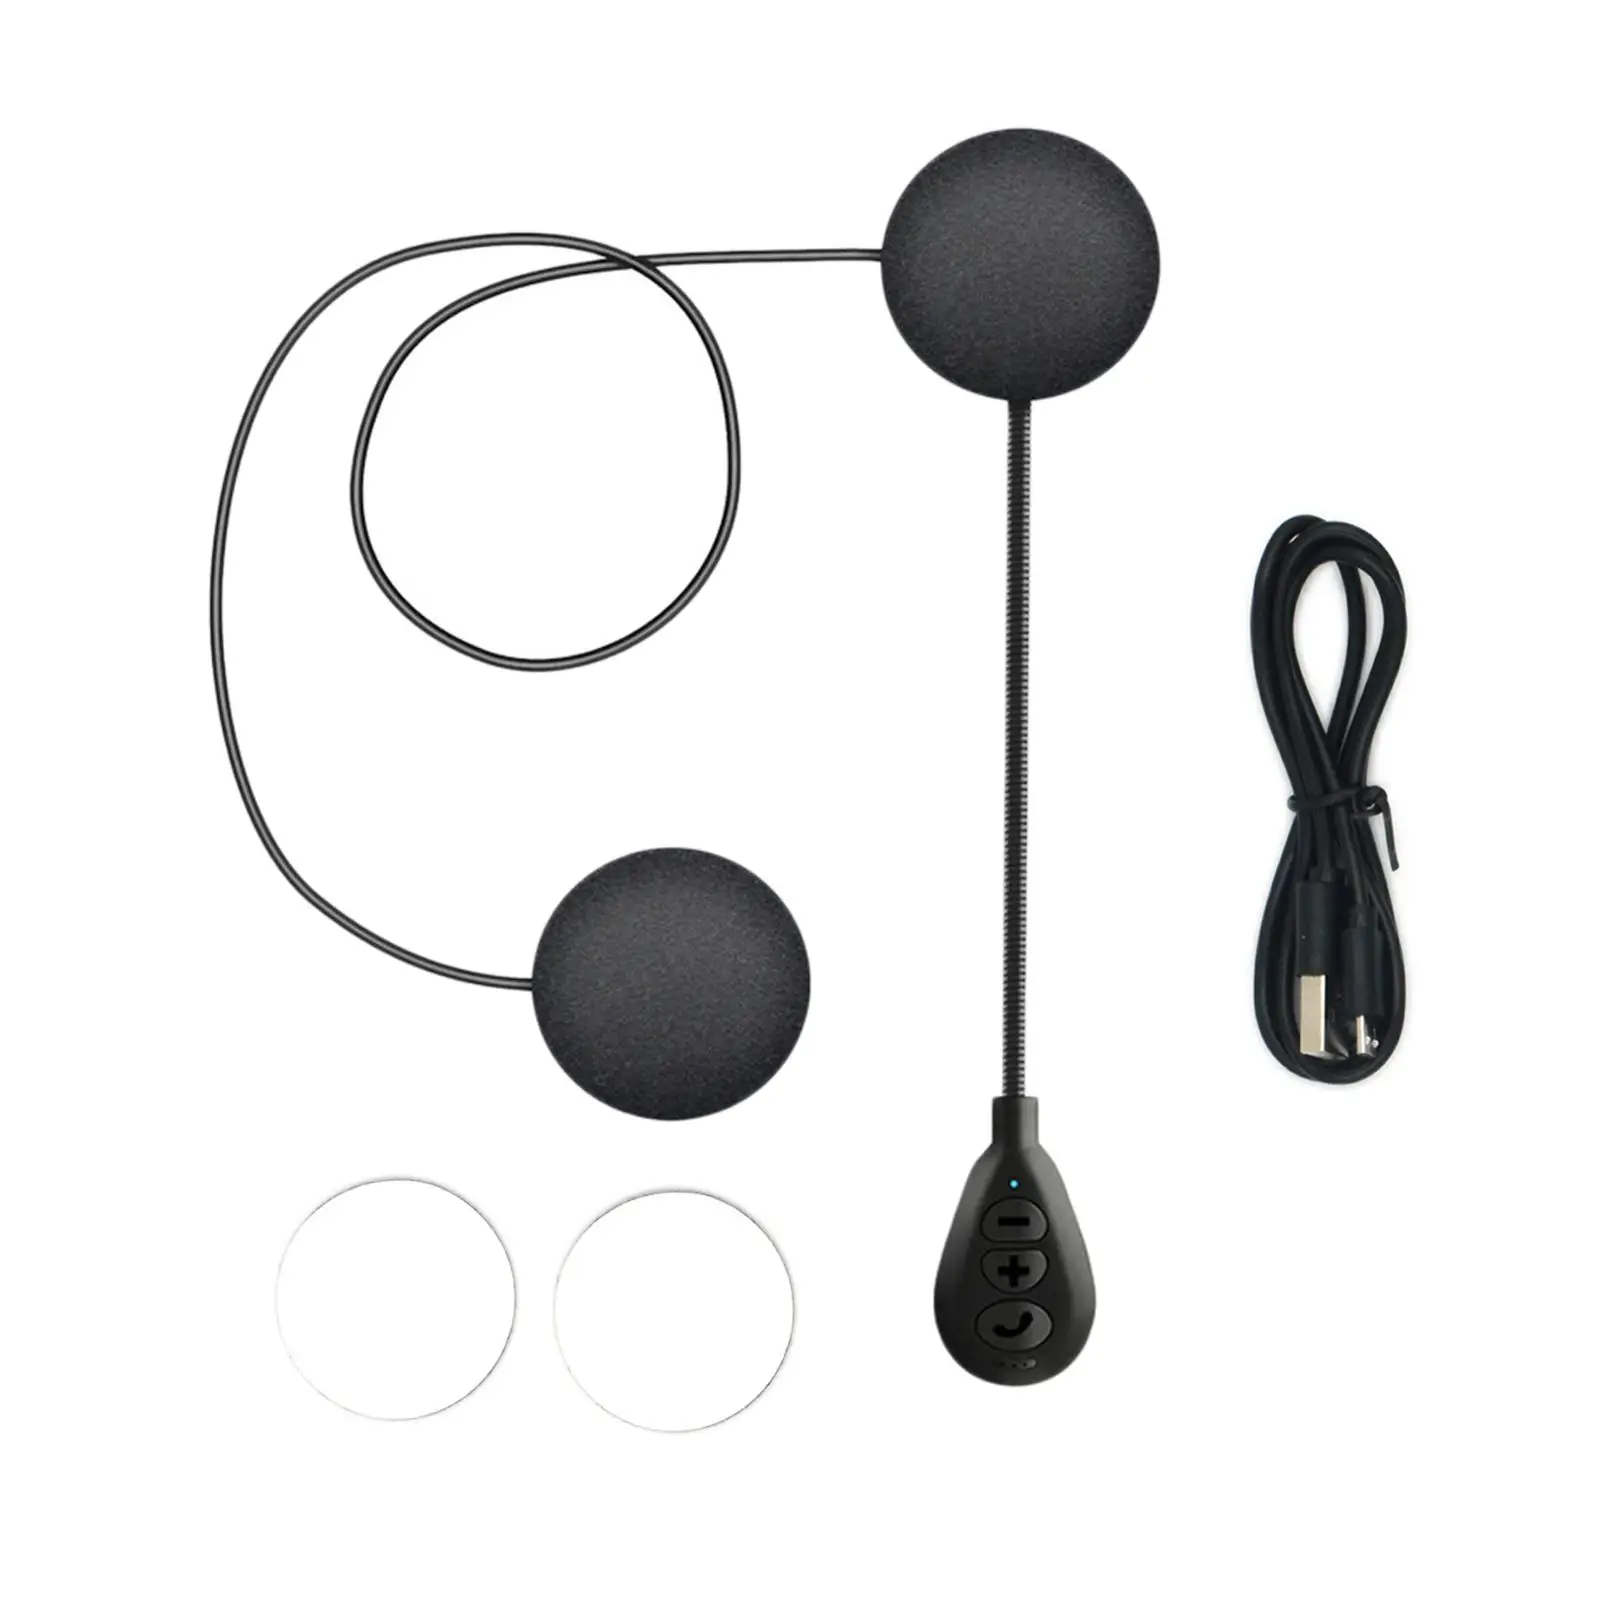  Bluetooth Helmet  Noise Cancelling Stereo Fits for Riding